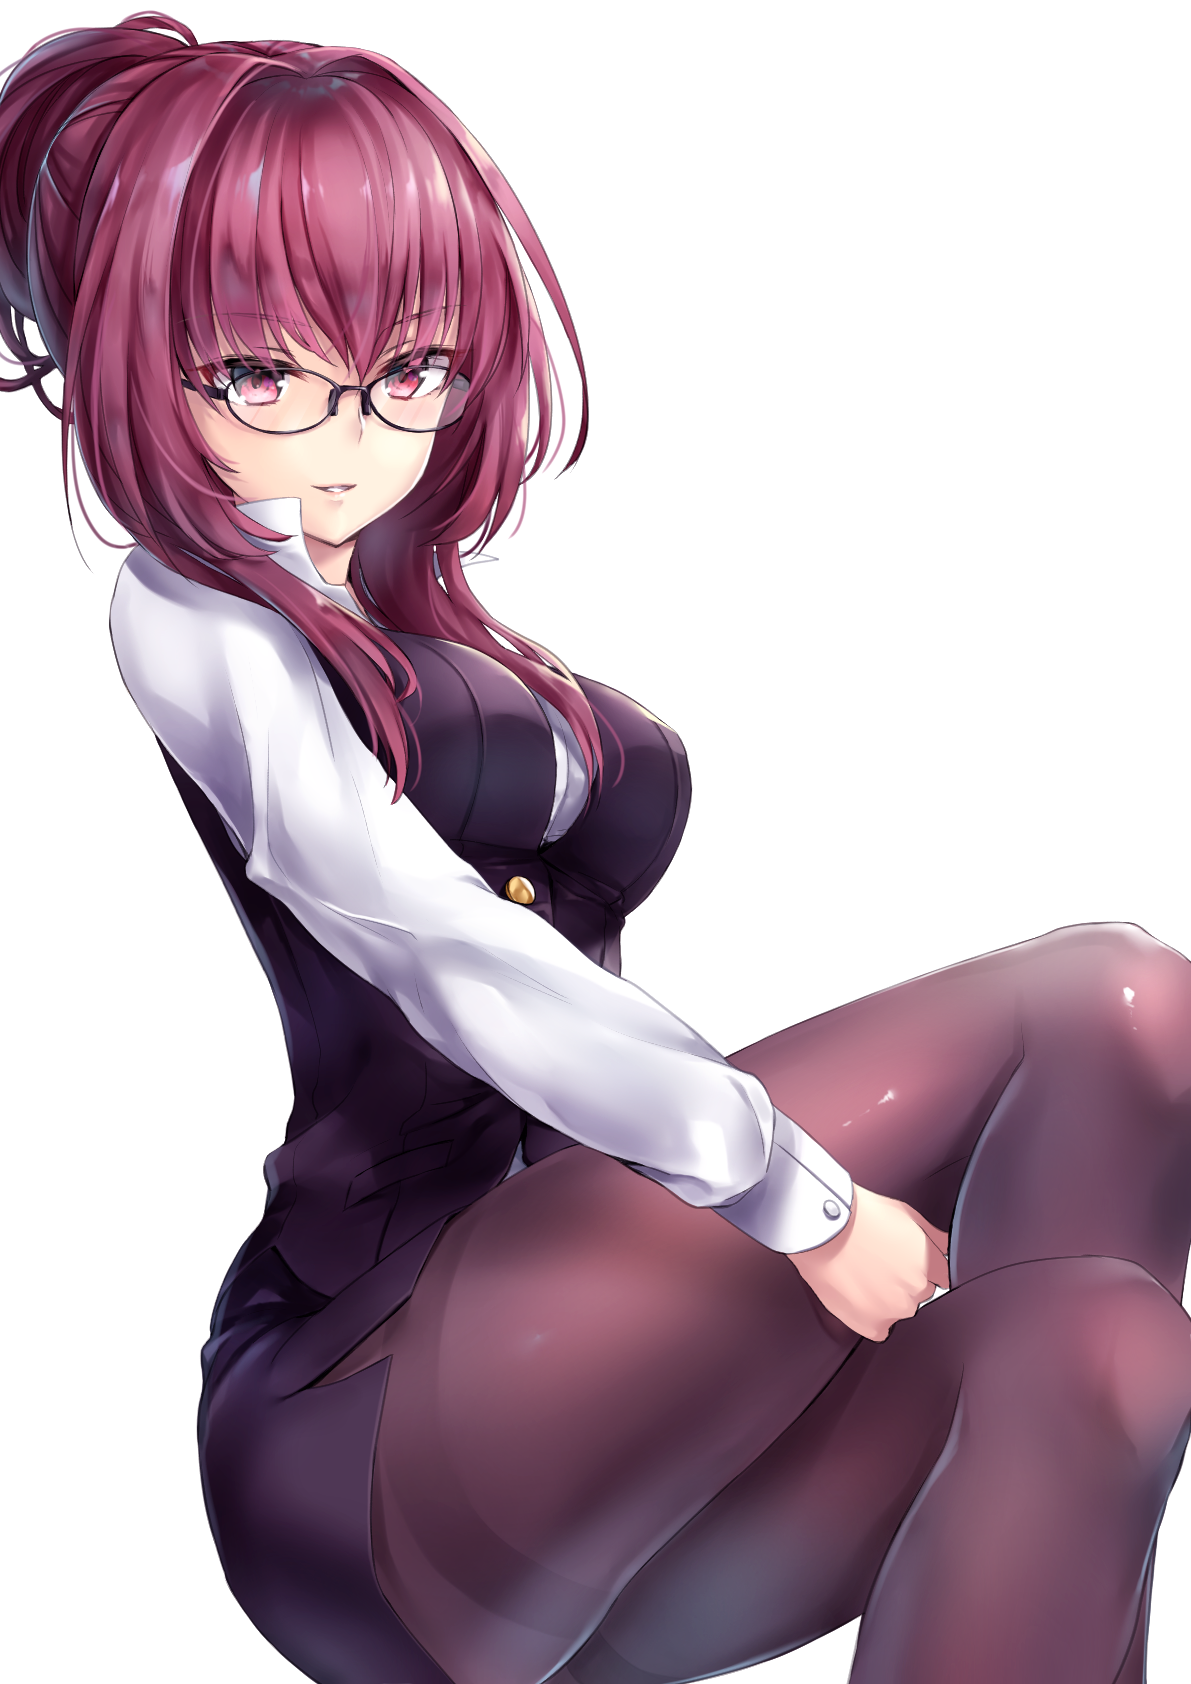 white_background_simple_background_business_suit_Fate_Grand_Order_glasses_Scathach_Fate_Grand_Order_stockings_pantyhose-1345945.jpg!d